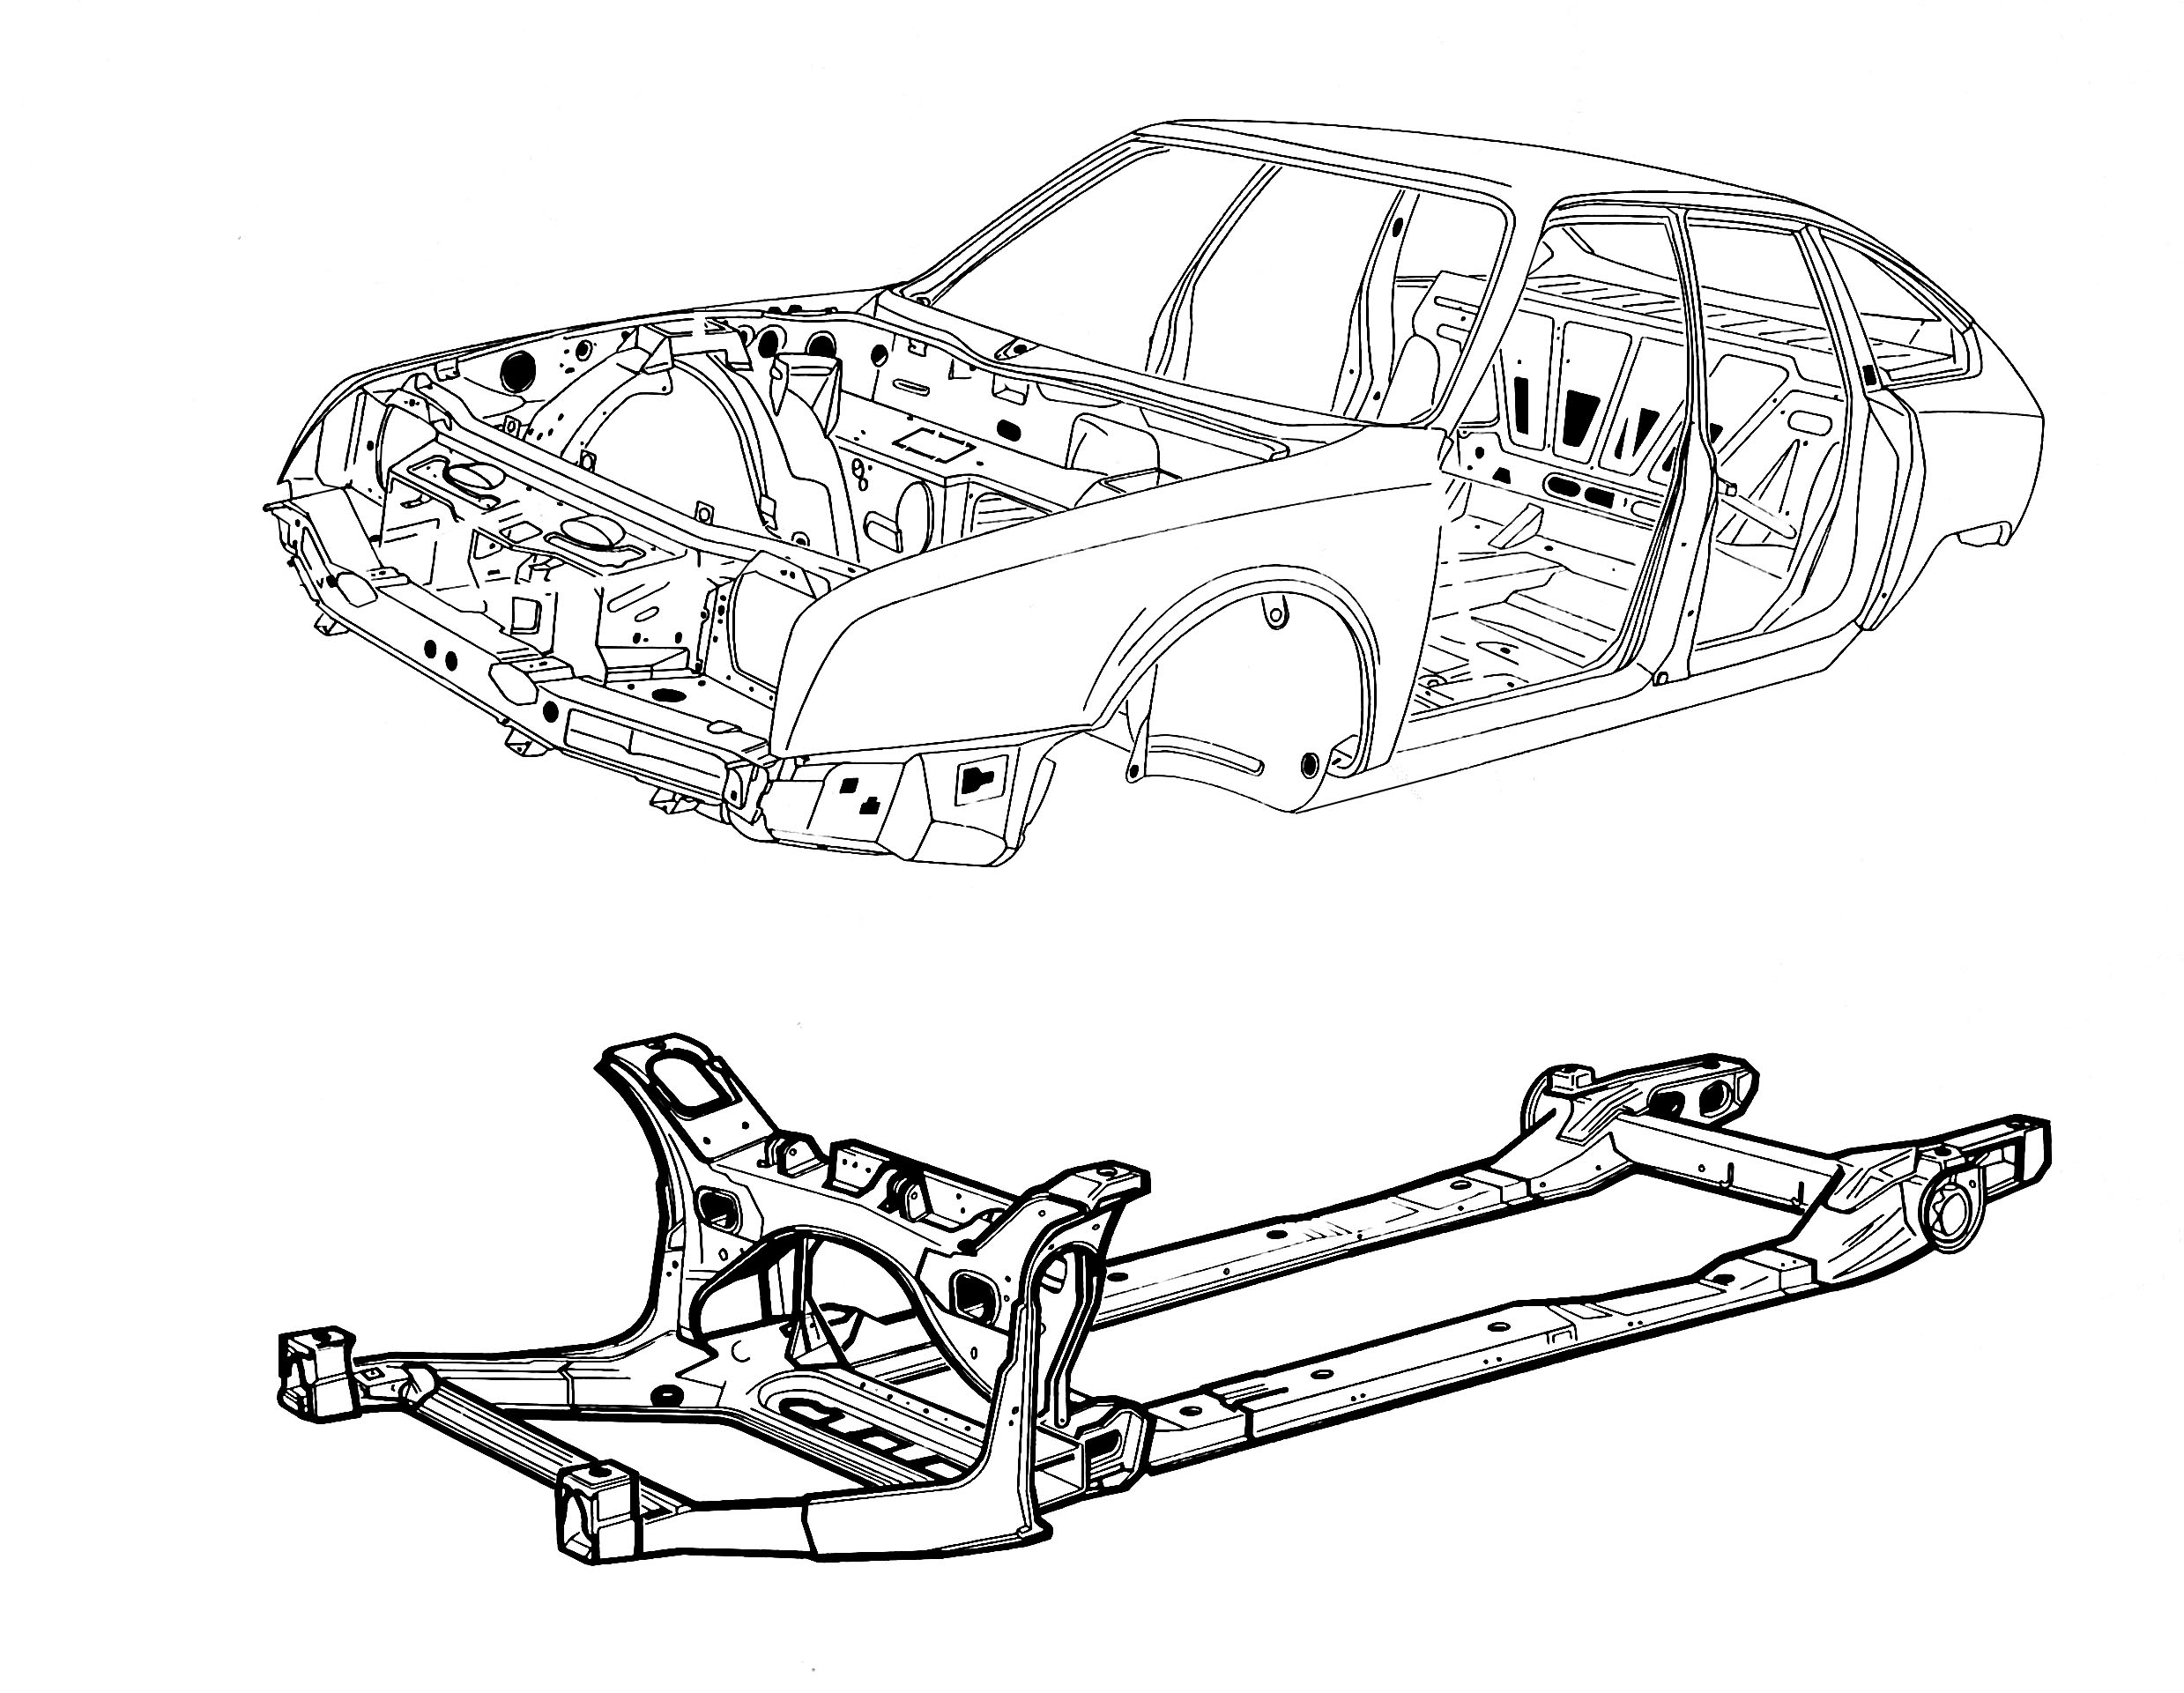 Drawing of the CX monocoque chassis with subframe assembly.